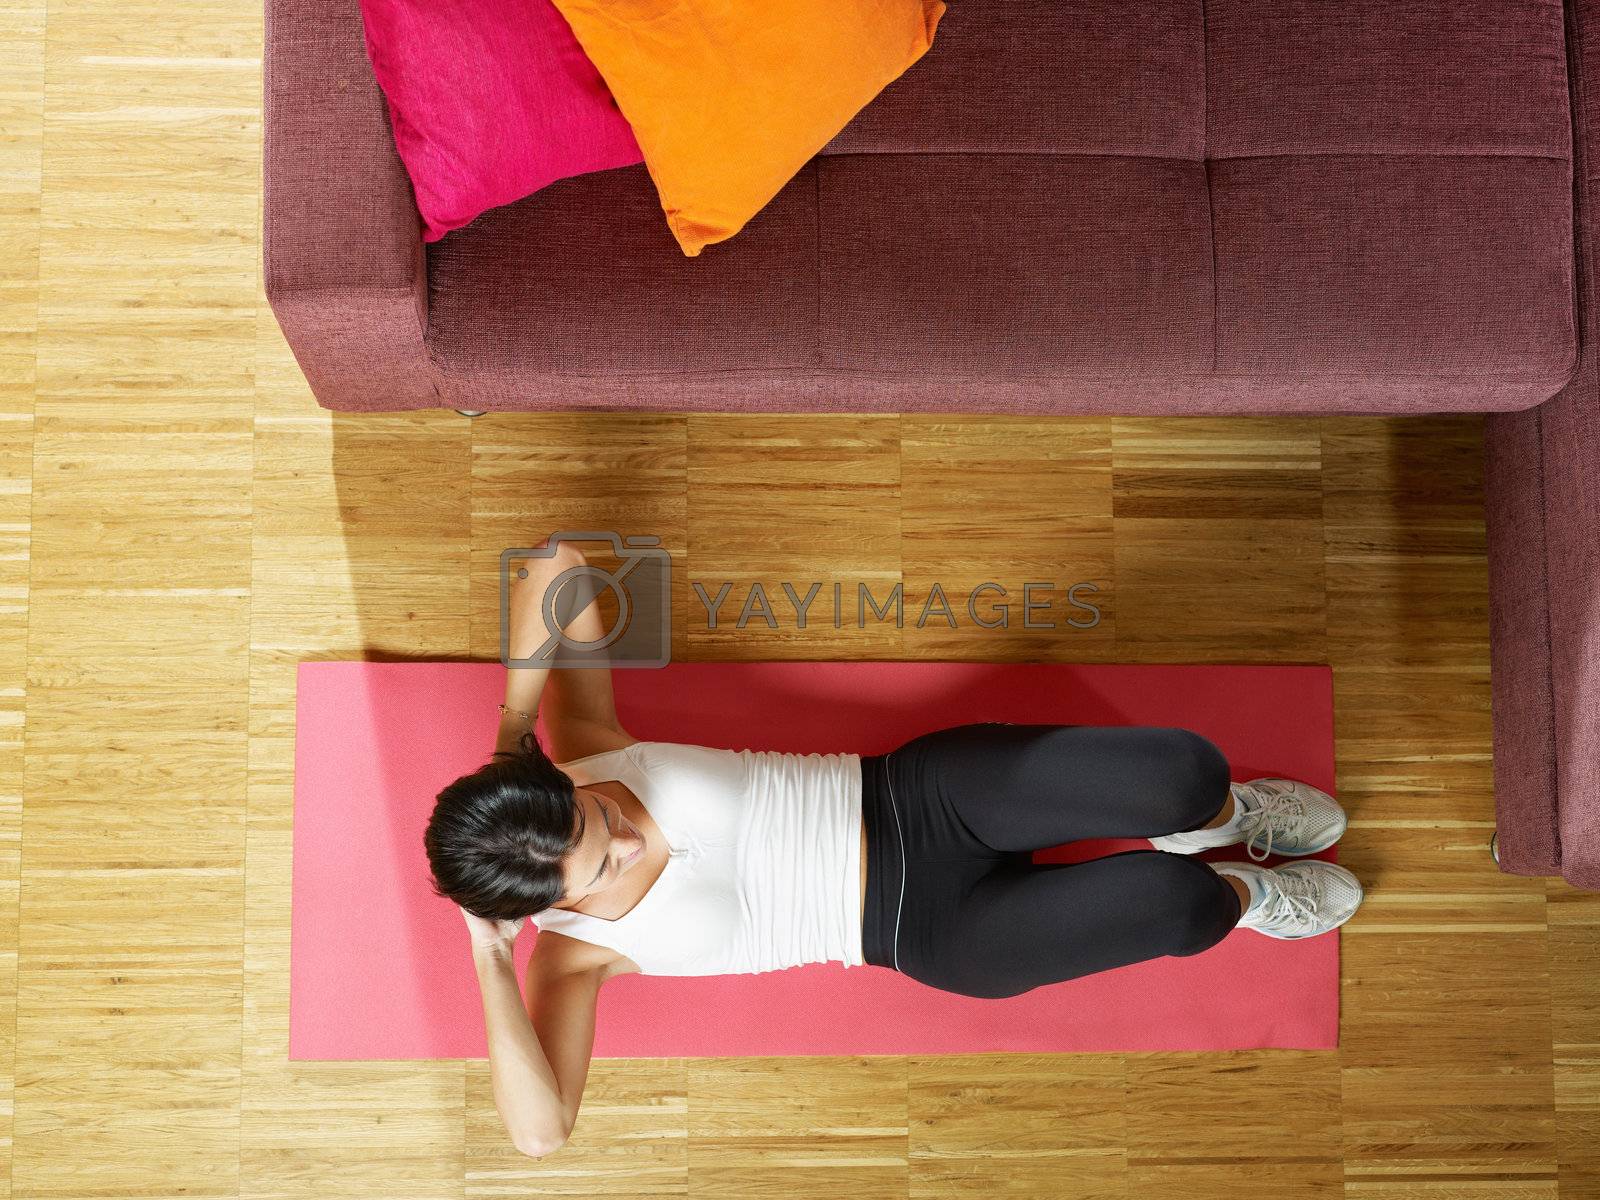 Royalty free image of woman doing abs exercise at home by diego_cervo